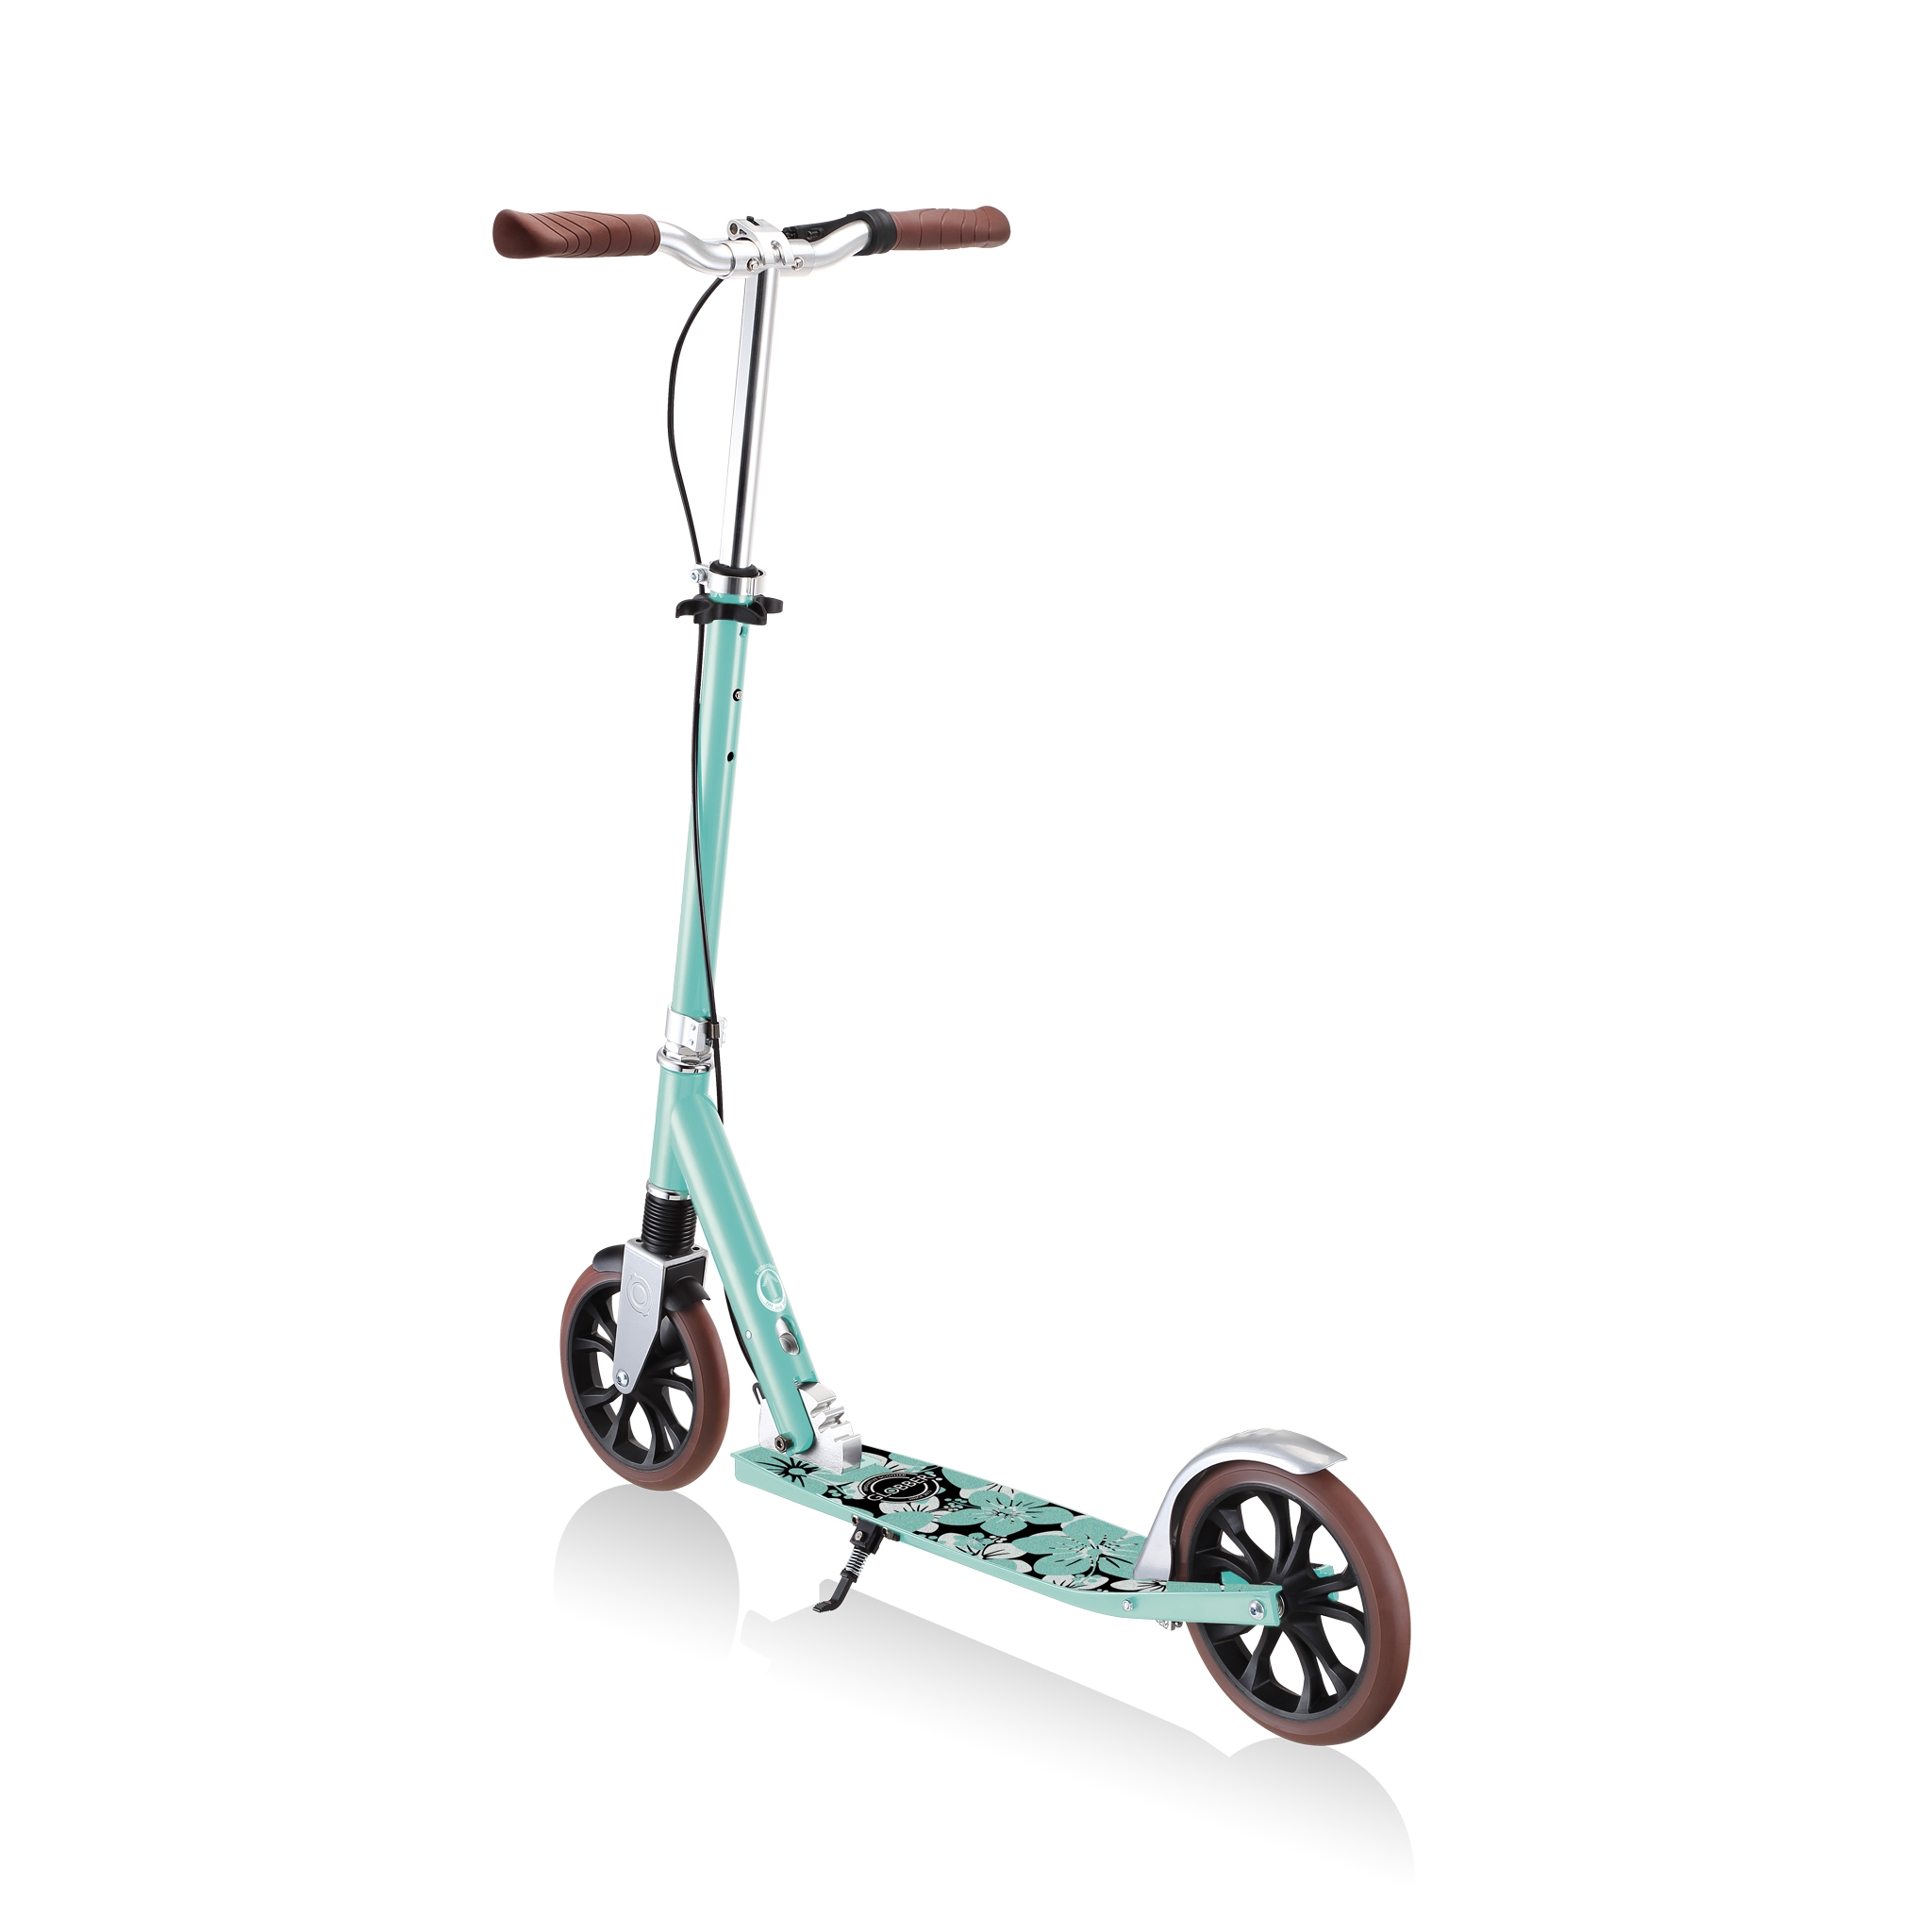 Globber-NL-205-DELUXE-big-wheel-scooter-for-kids-with-front-suspension 6